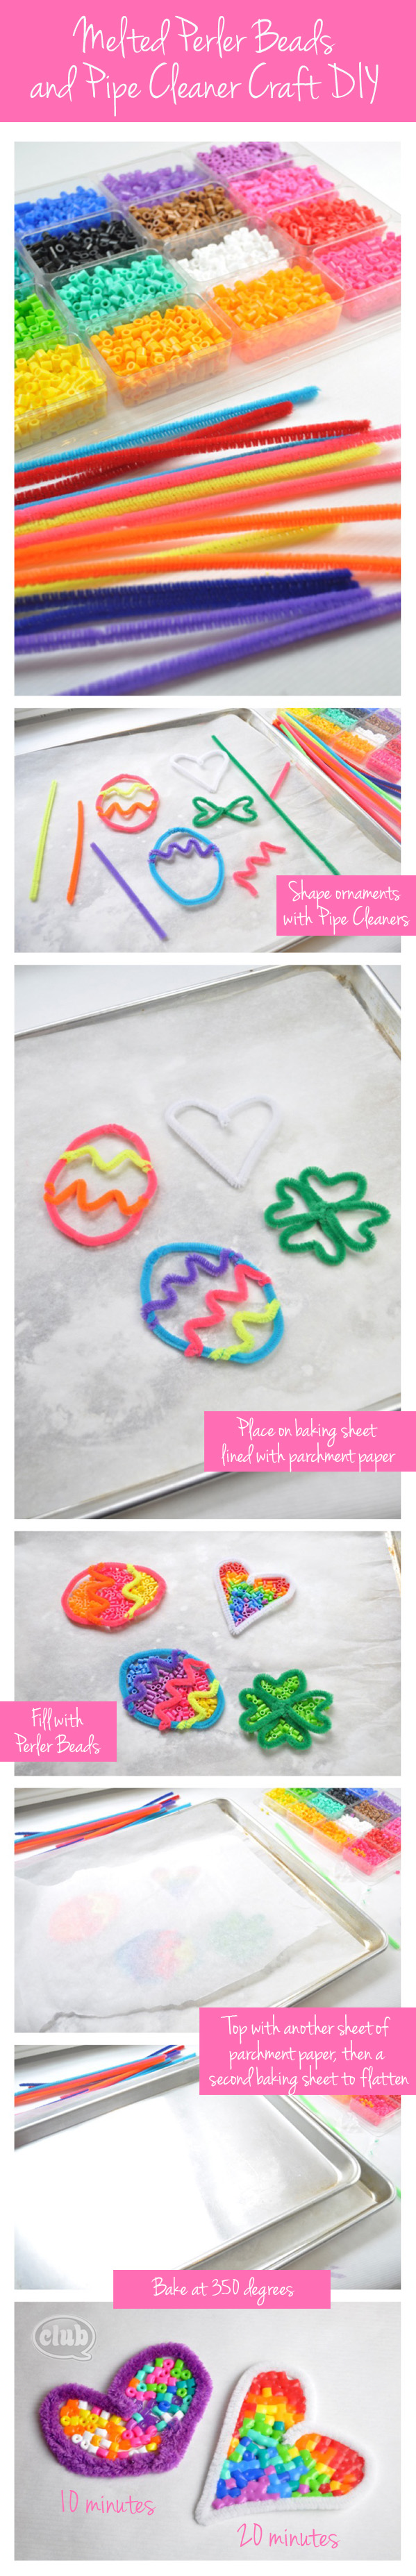 melted perler bead pipe cleaner ornament DIY